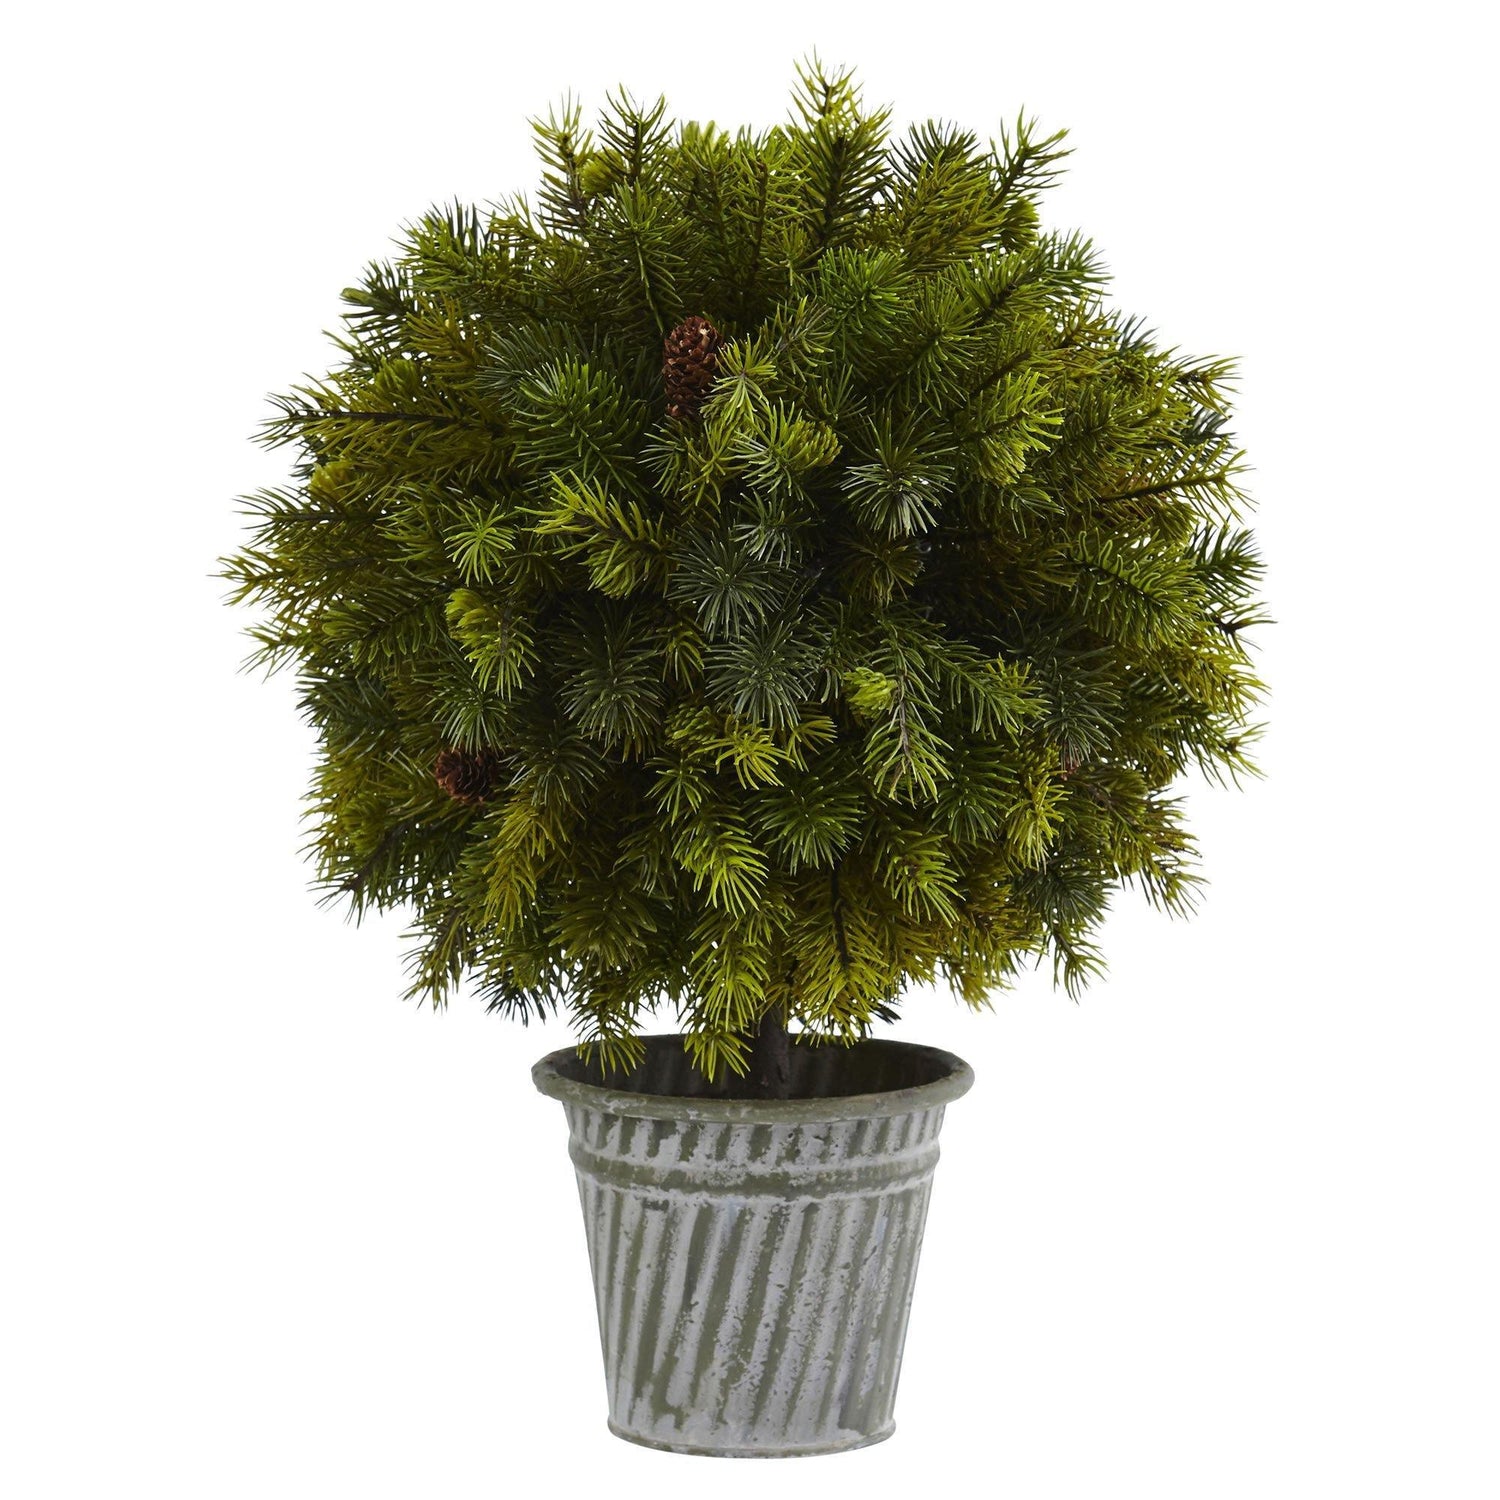 18” Pine Ball in Iron Top